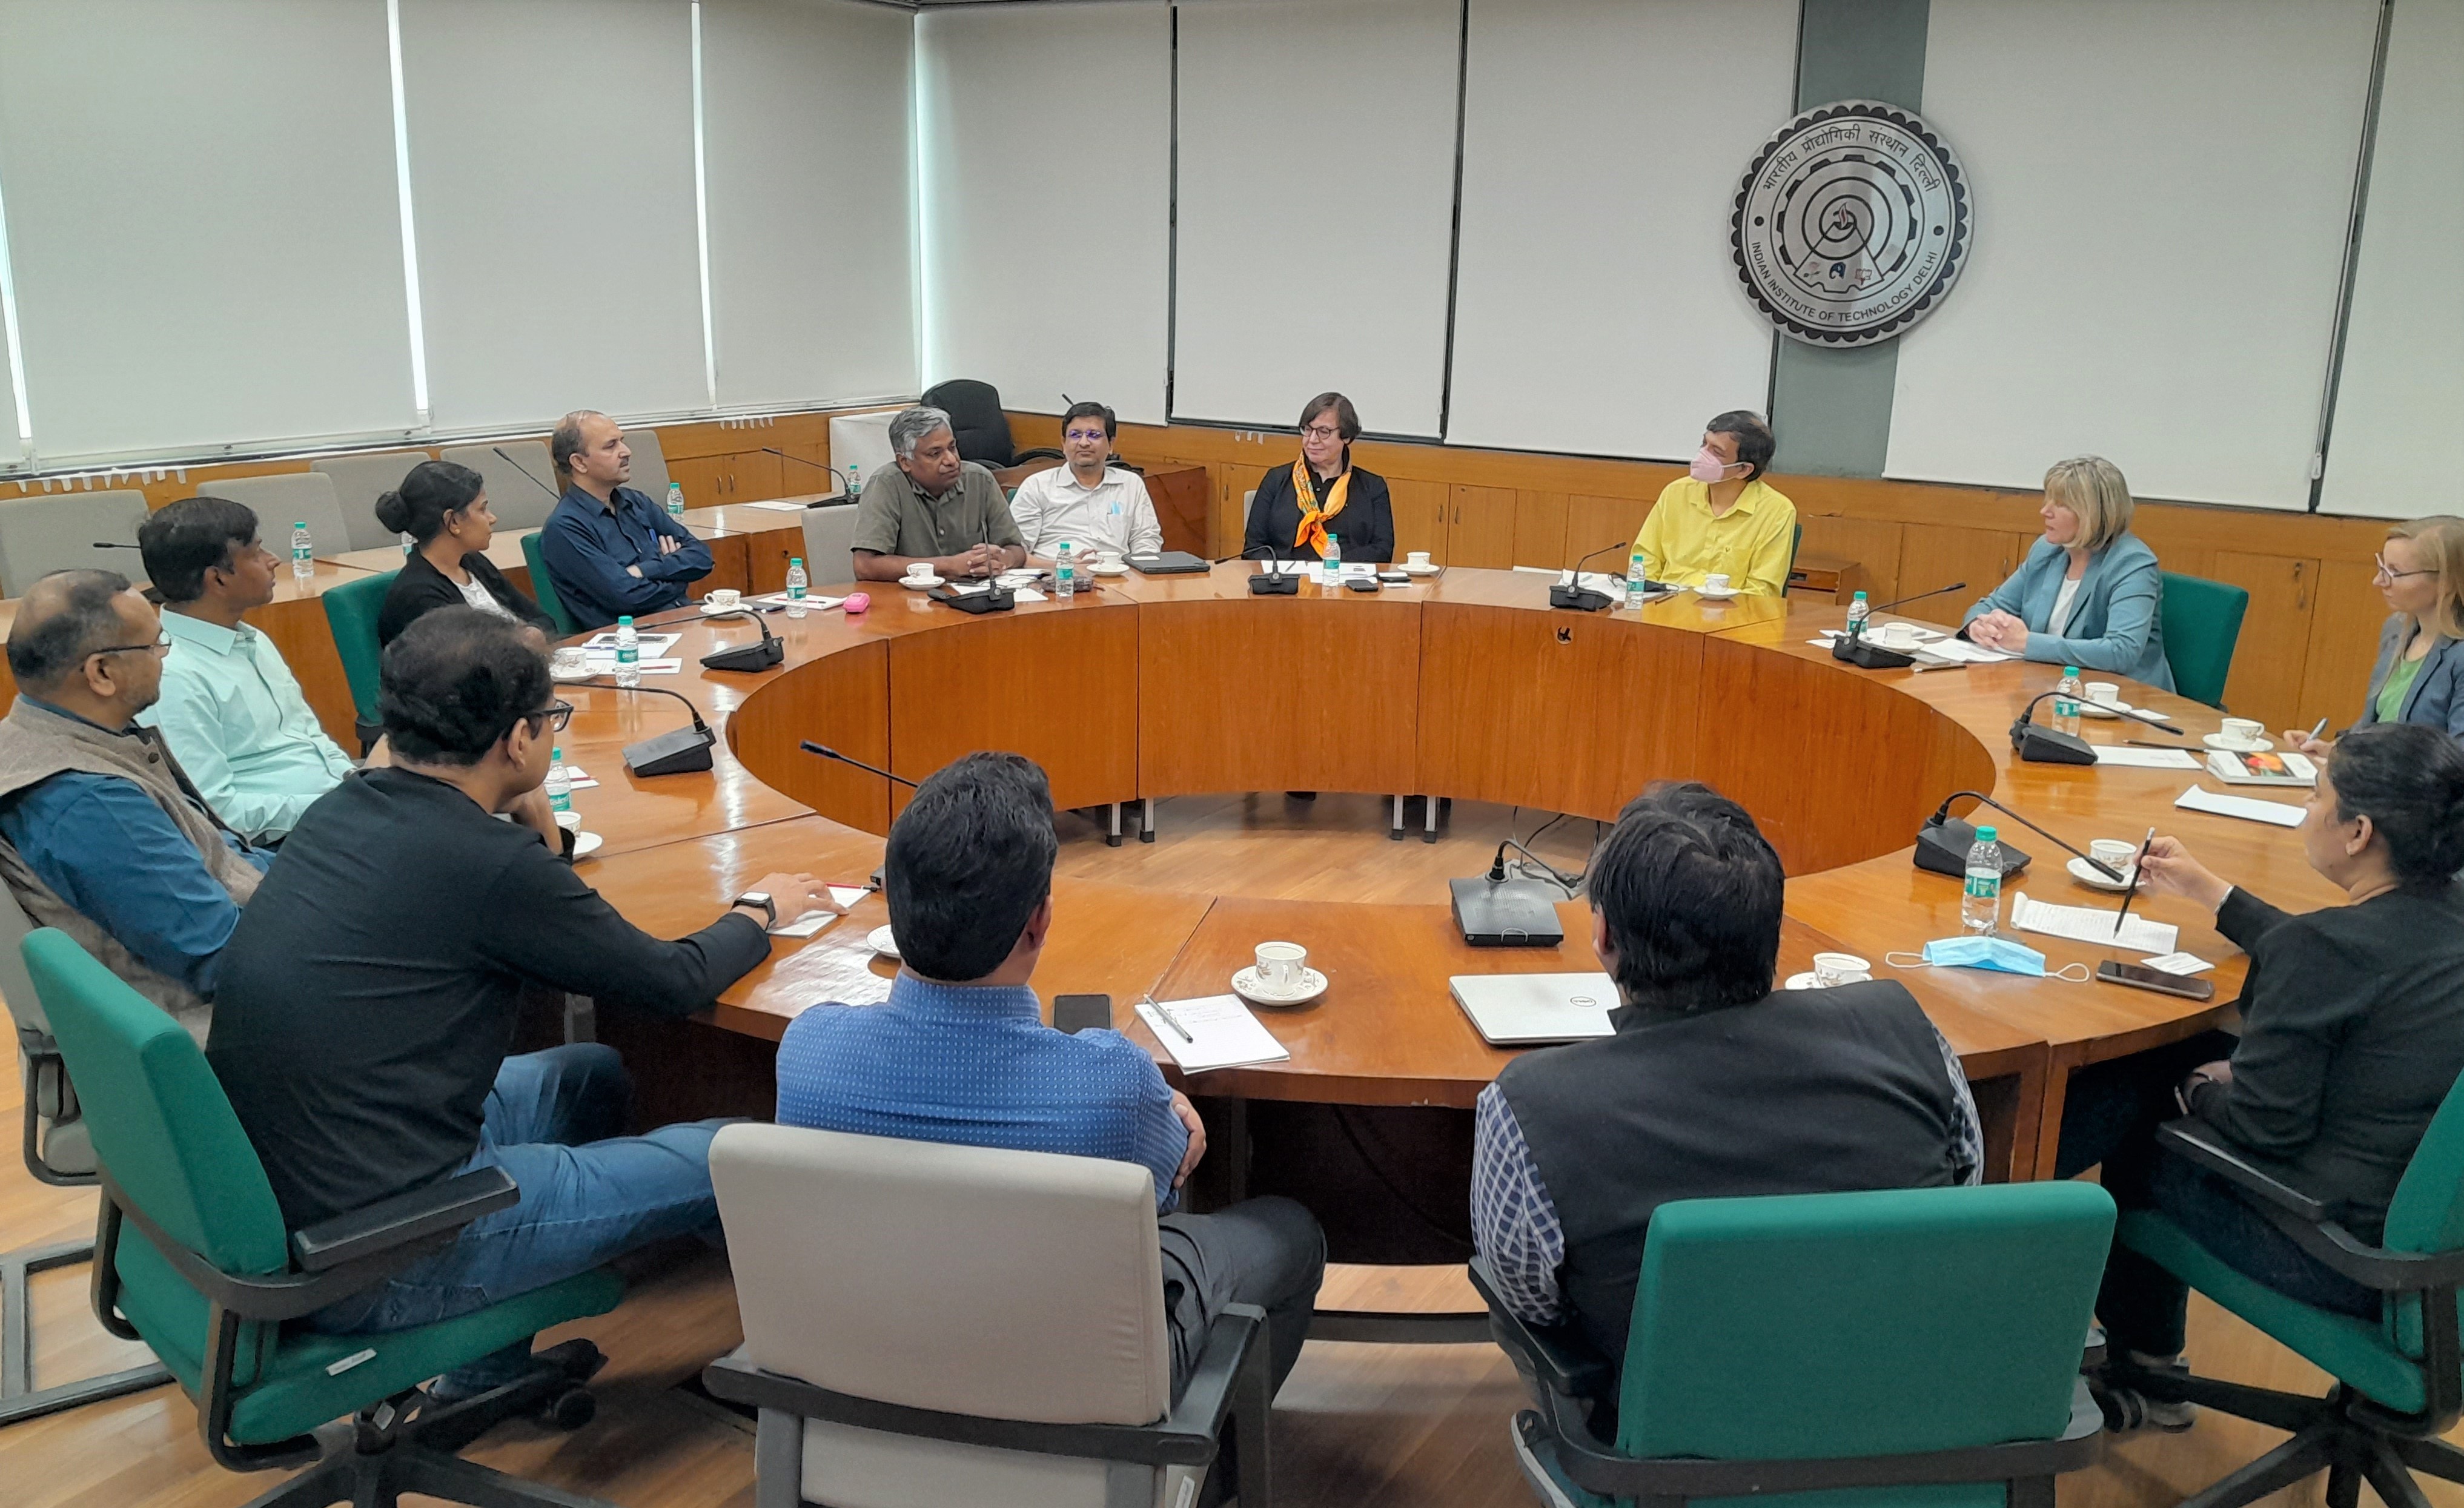 Round Table meeting with Prof. Rangan Banerjee, Director, IIT-Delhi and faculty members from various departments